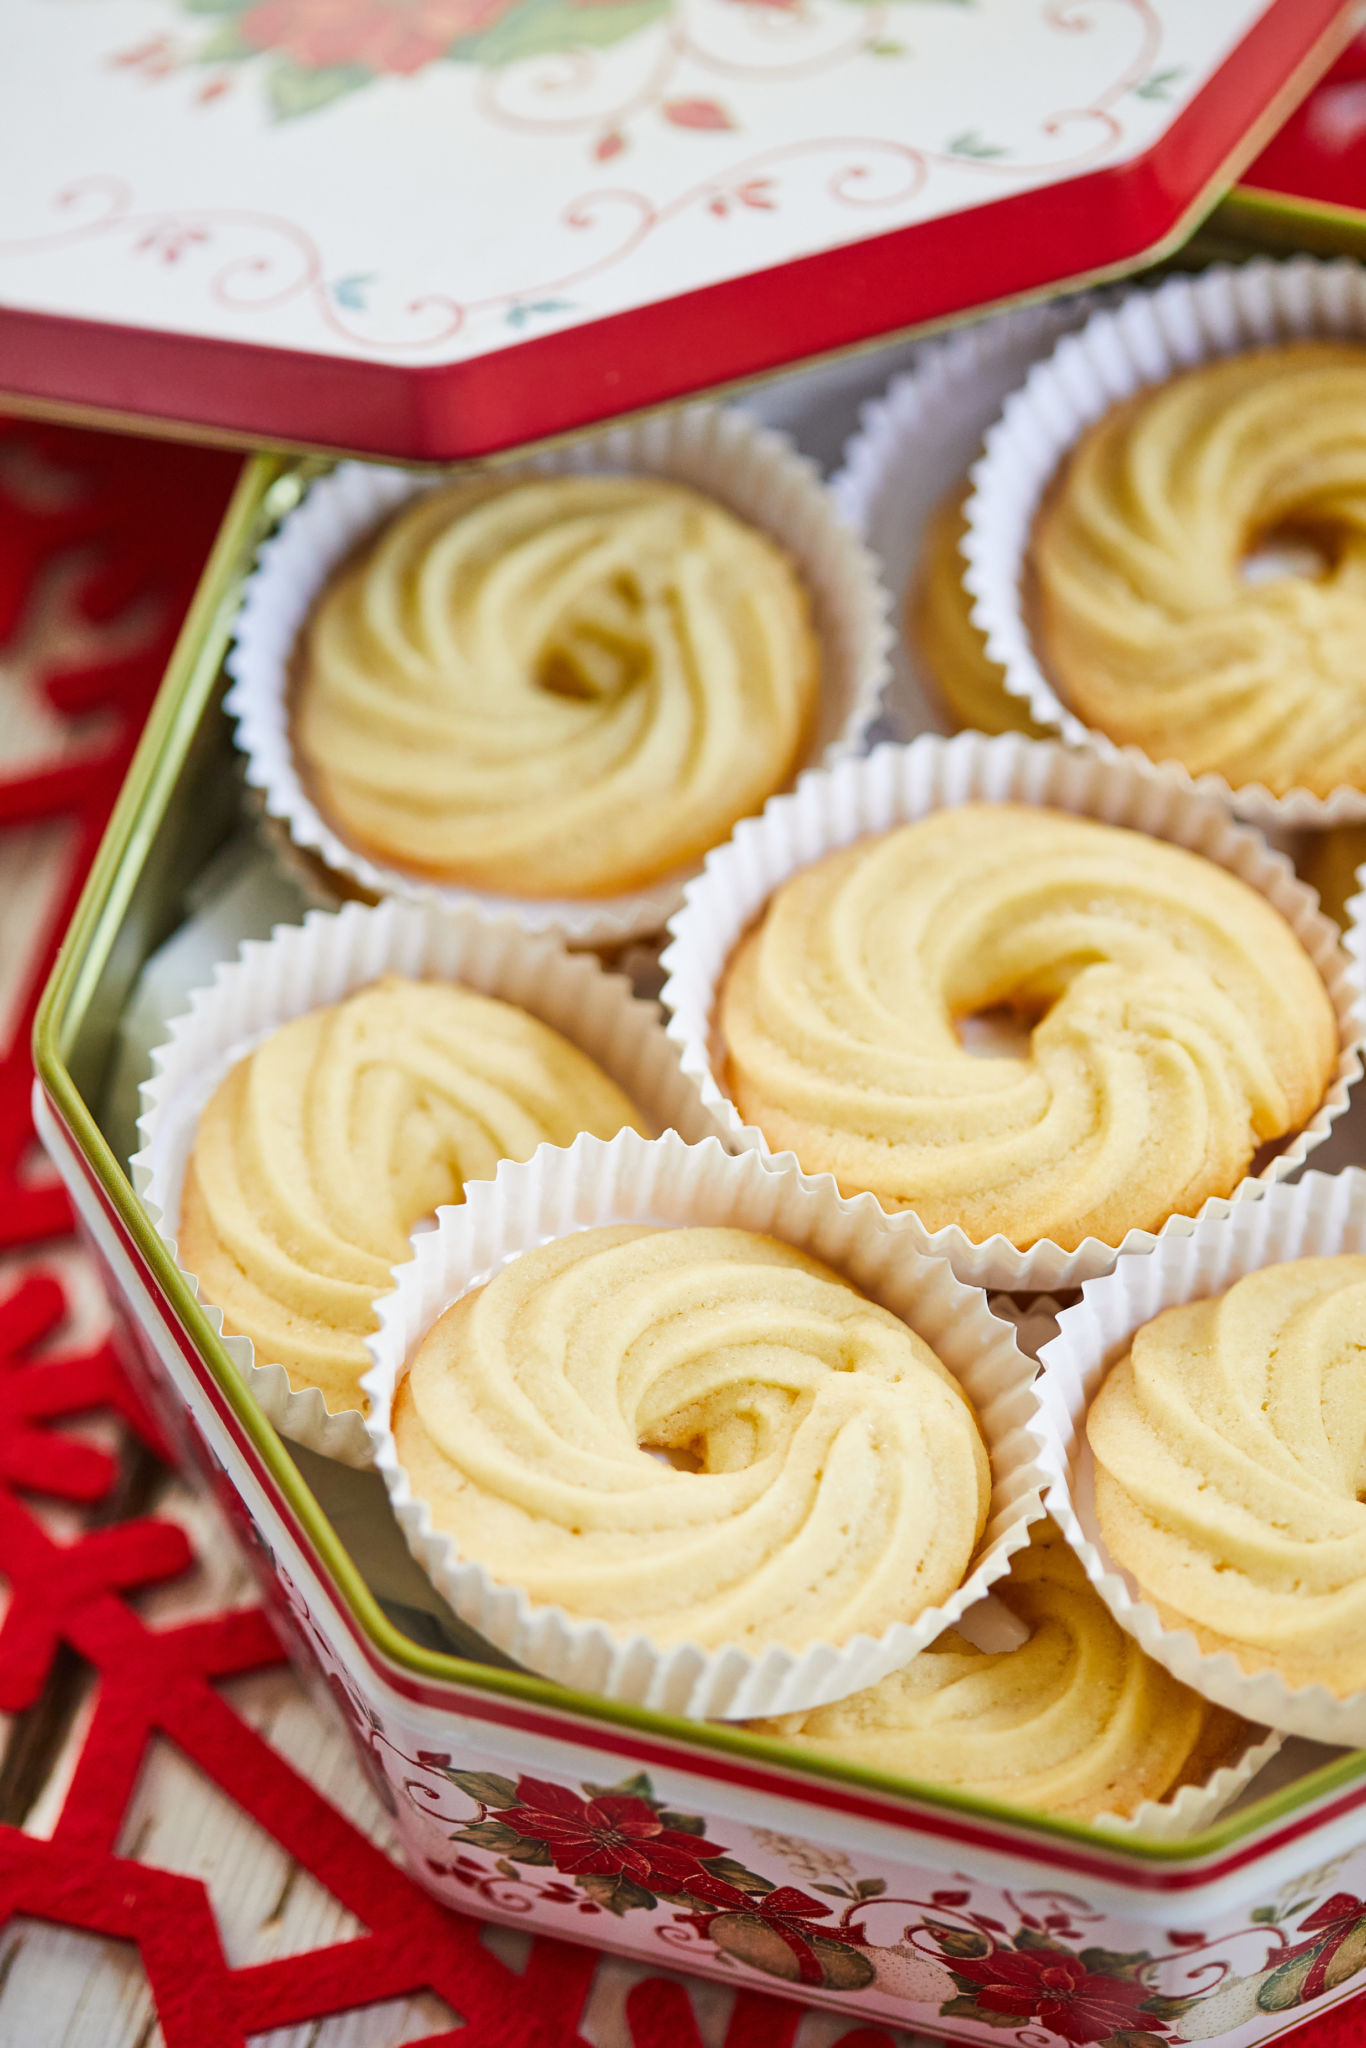 Festive Danish Butter Cookies are stored in cupcake liners in a red and white Christmas-themed metal tin. Danish cookies are baked until lightly golden with slight crisp on the outside. 